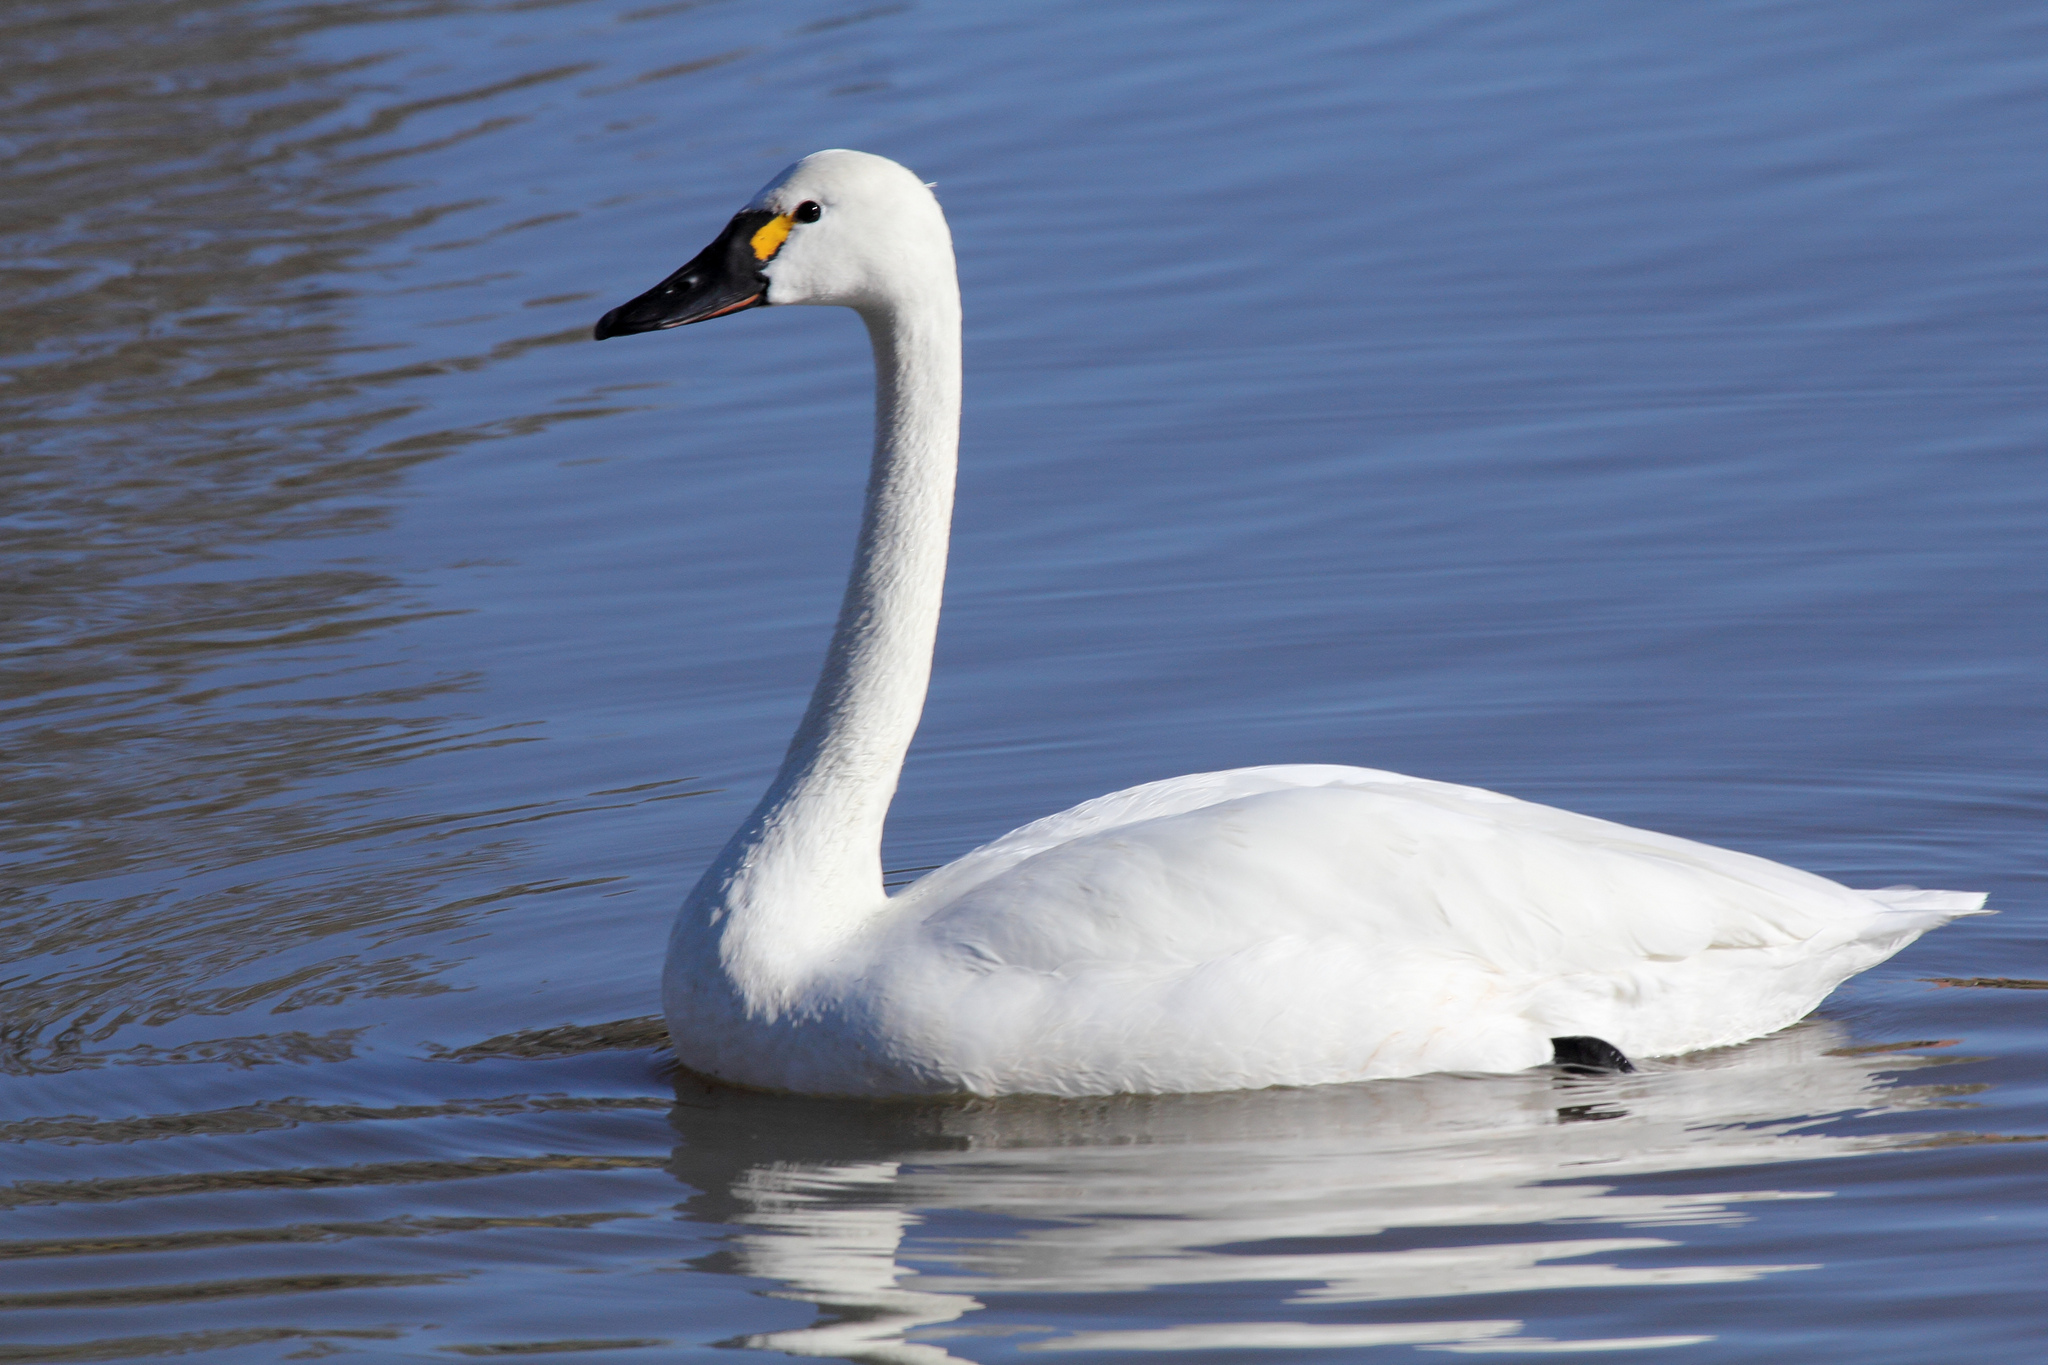 Nature Canada – Birds and Climate: Swans Move North